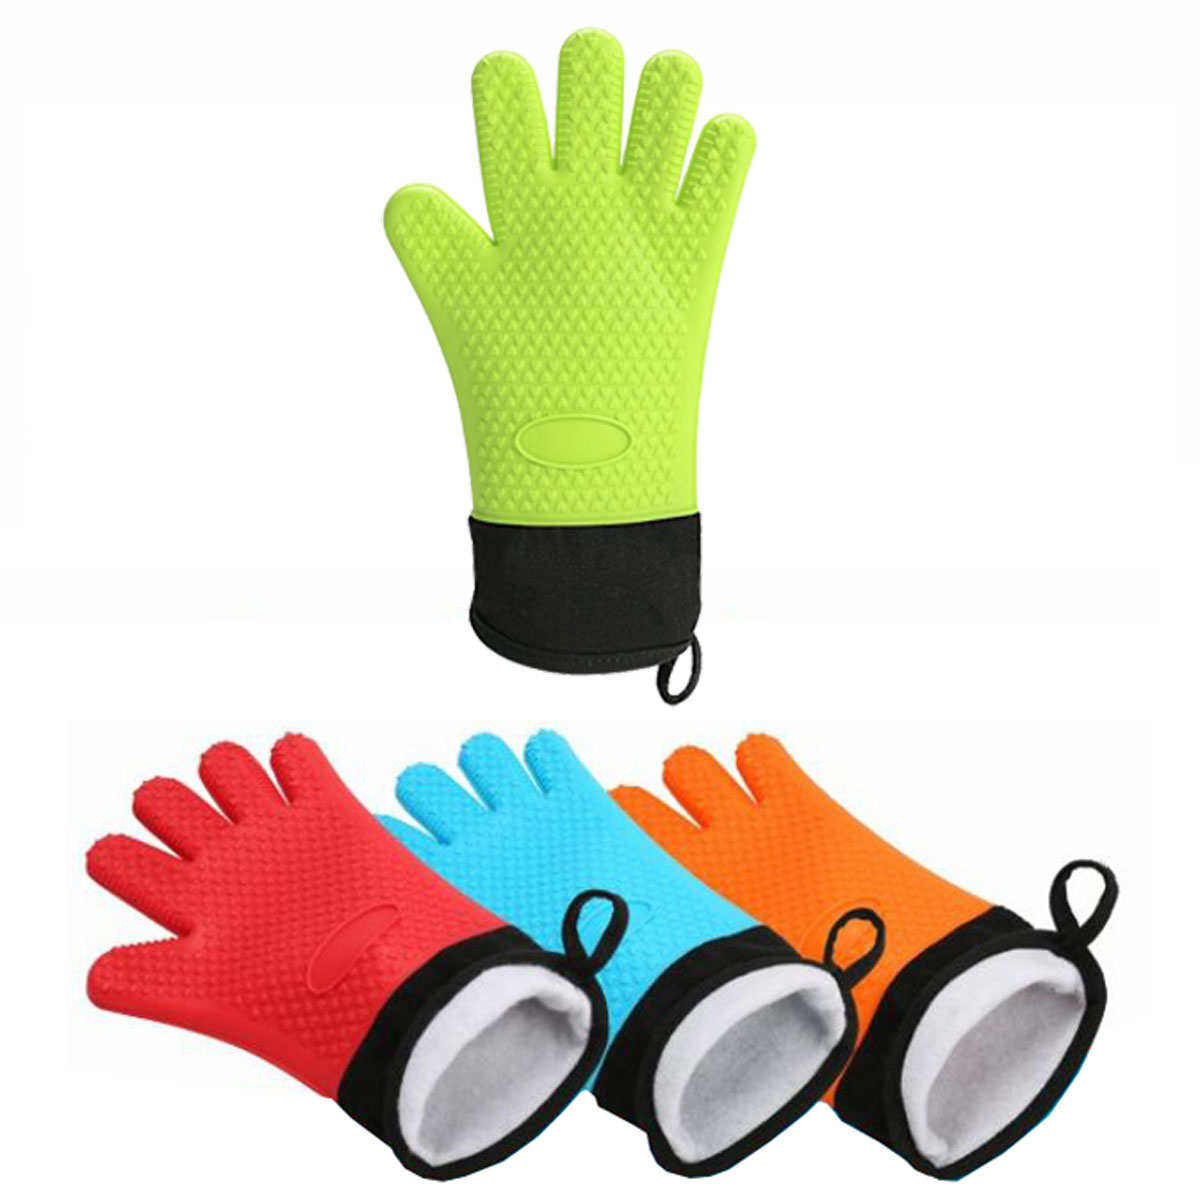 GL-AAD1031 Heat Resistant Silicone Baking Glove